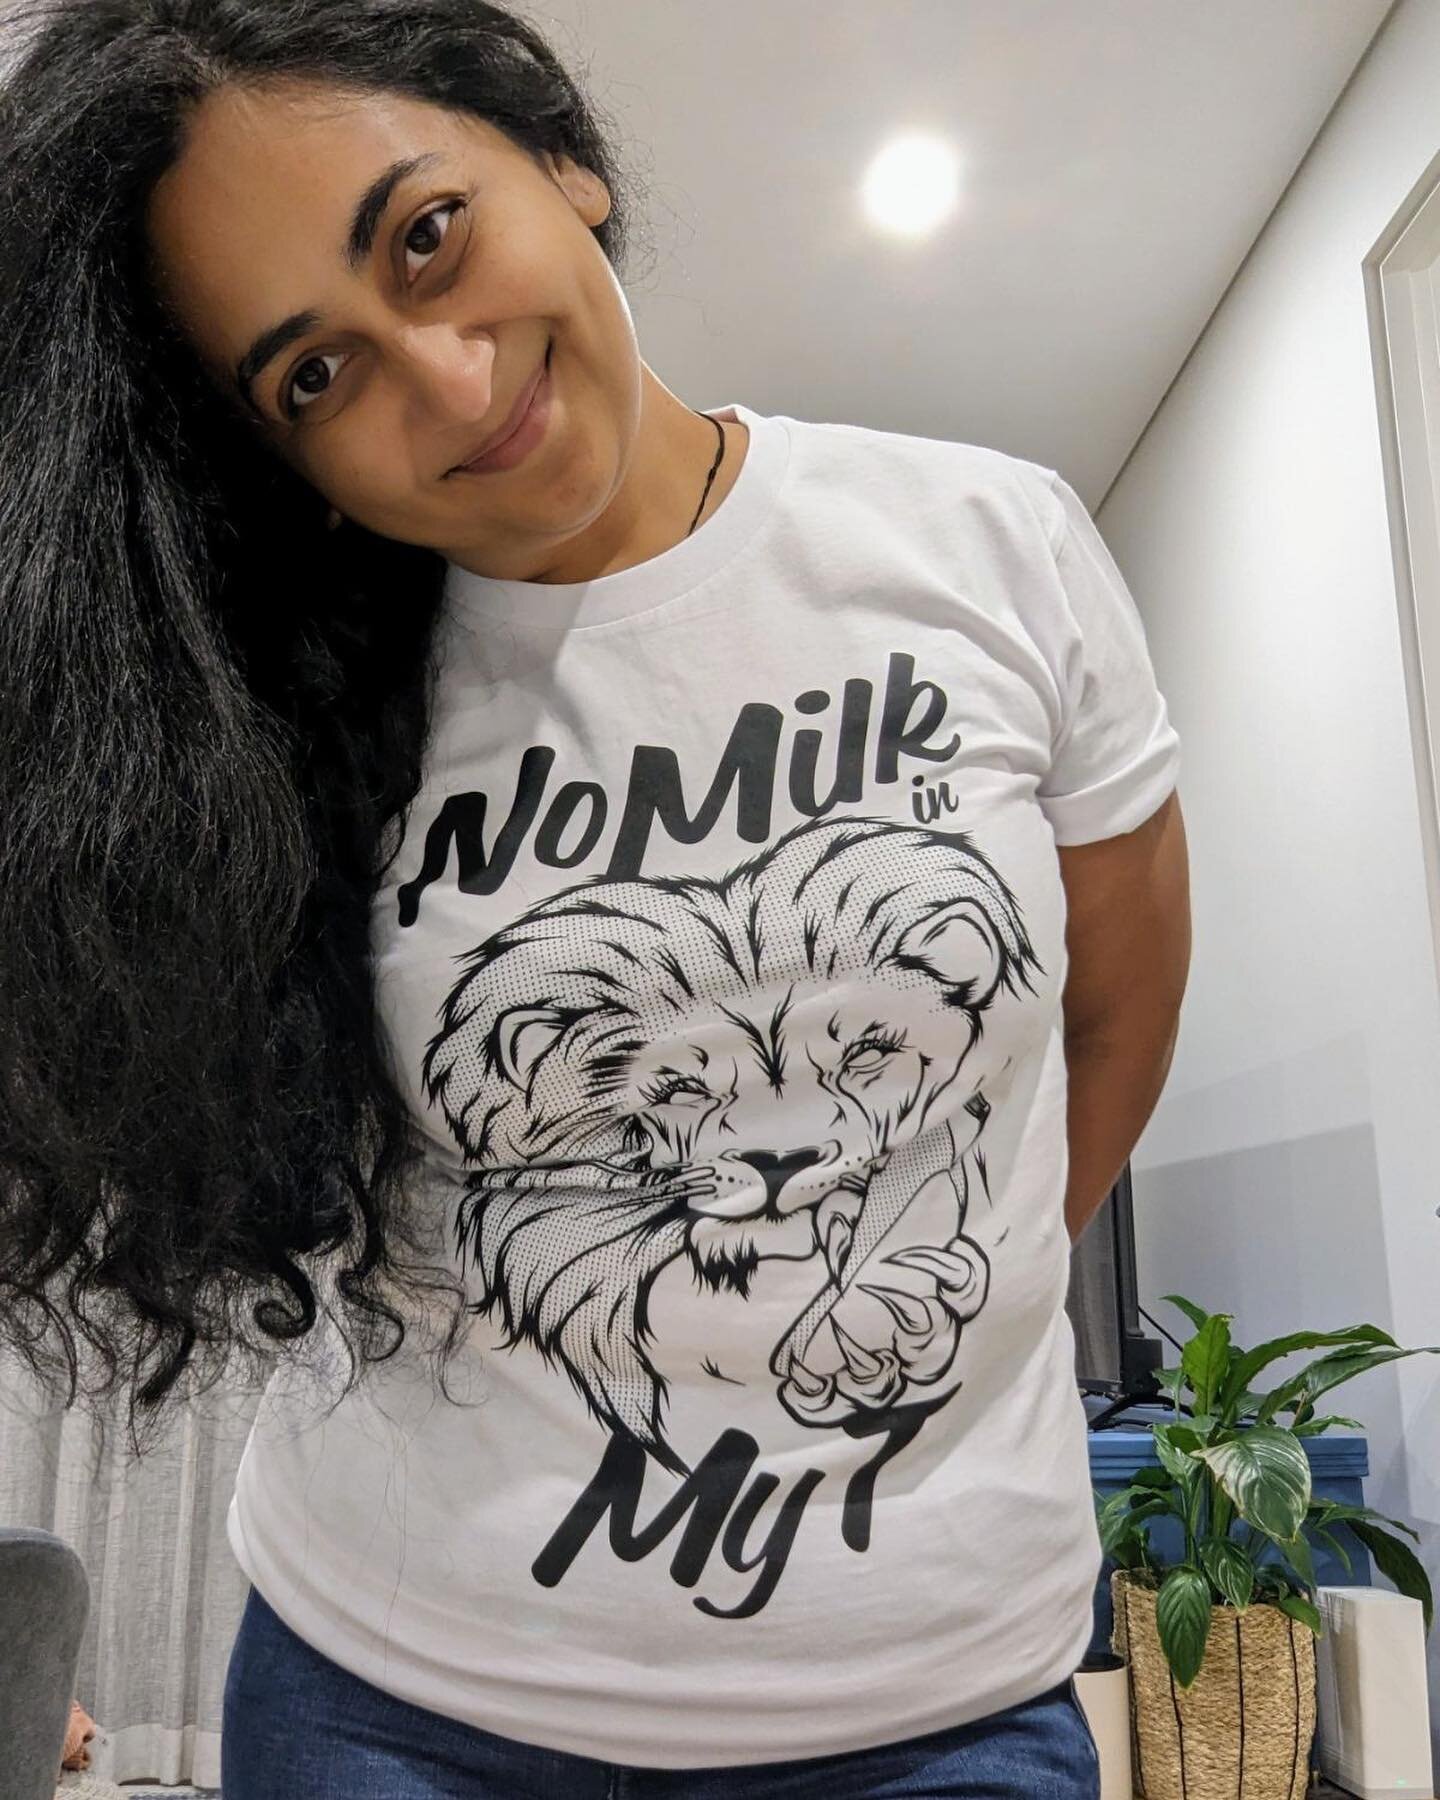 After Anika told me her tee had not arrived, and both of us checked the tracking, Anika checked the mailbox and offered some humble honesty: 

&ldquo;I guess if I'm expecting mail I should check my mail&rdquo; 😂😂
Rocking the lion Anika - so glad it